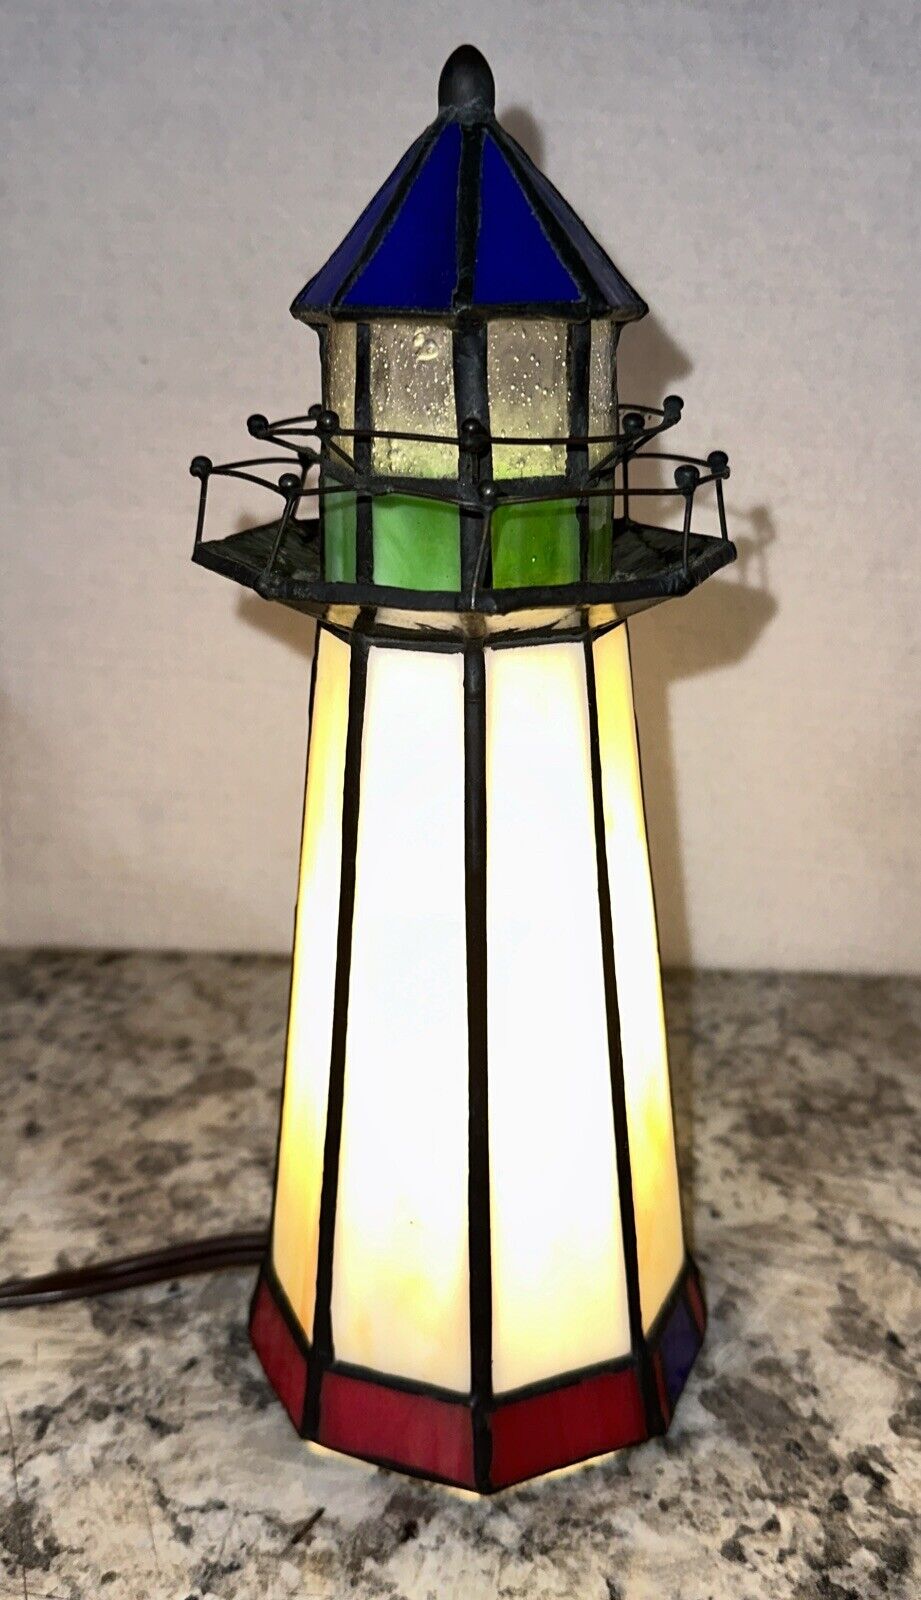 STAINED GLASS Light House Tiffany style 3 3/5”w X 10” h Night Light/Lamp EUC